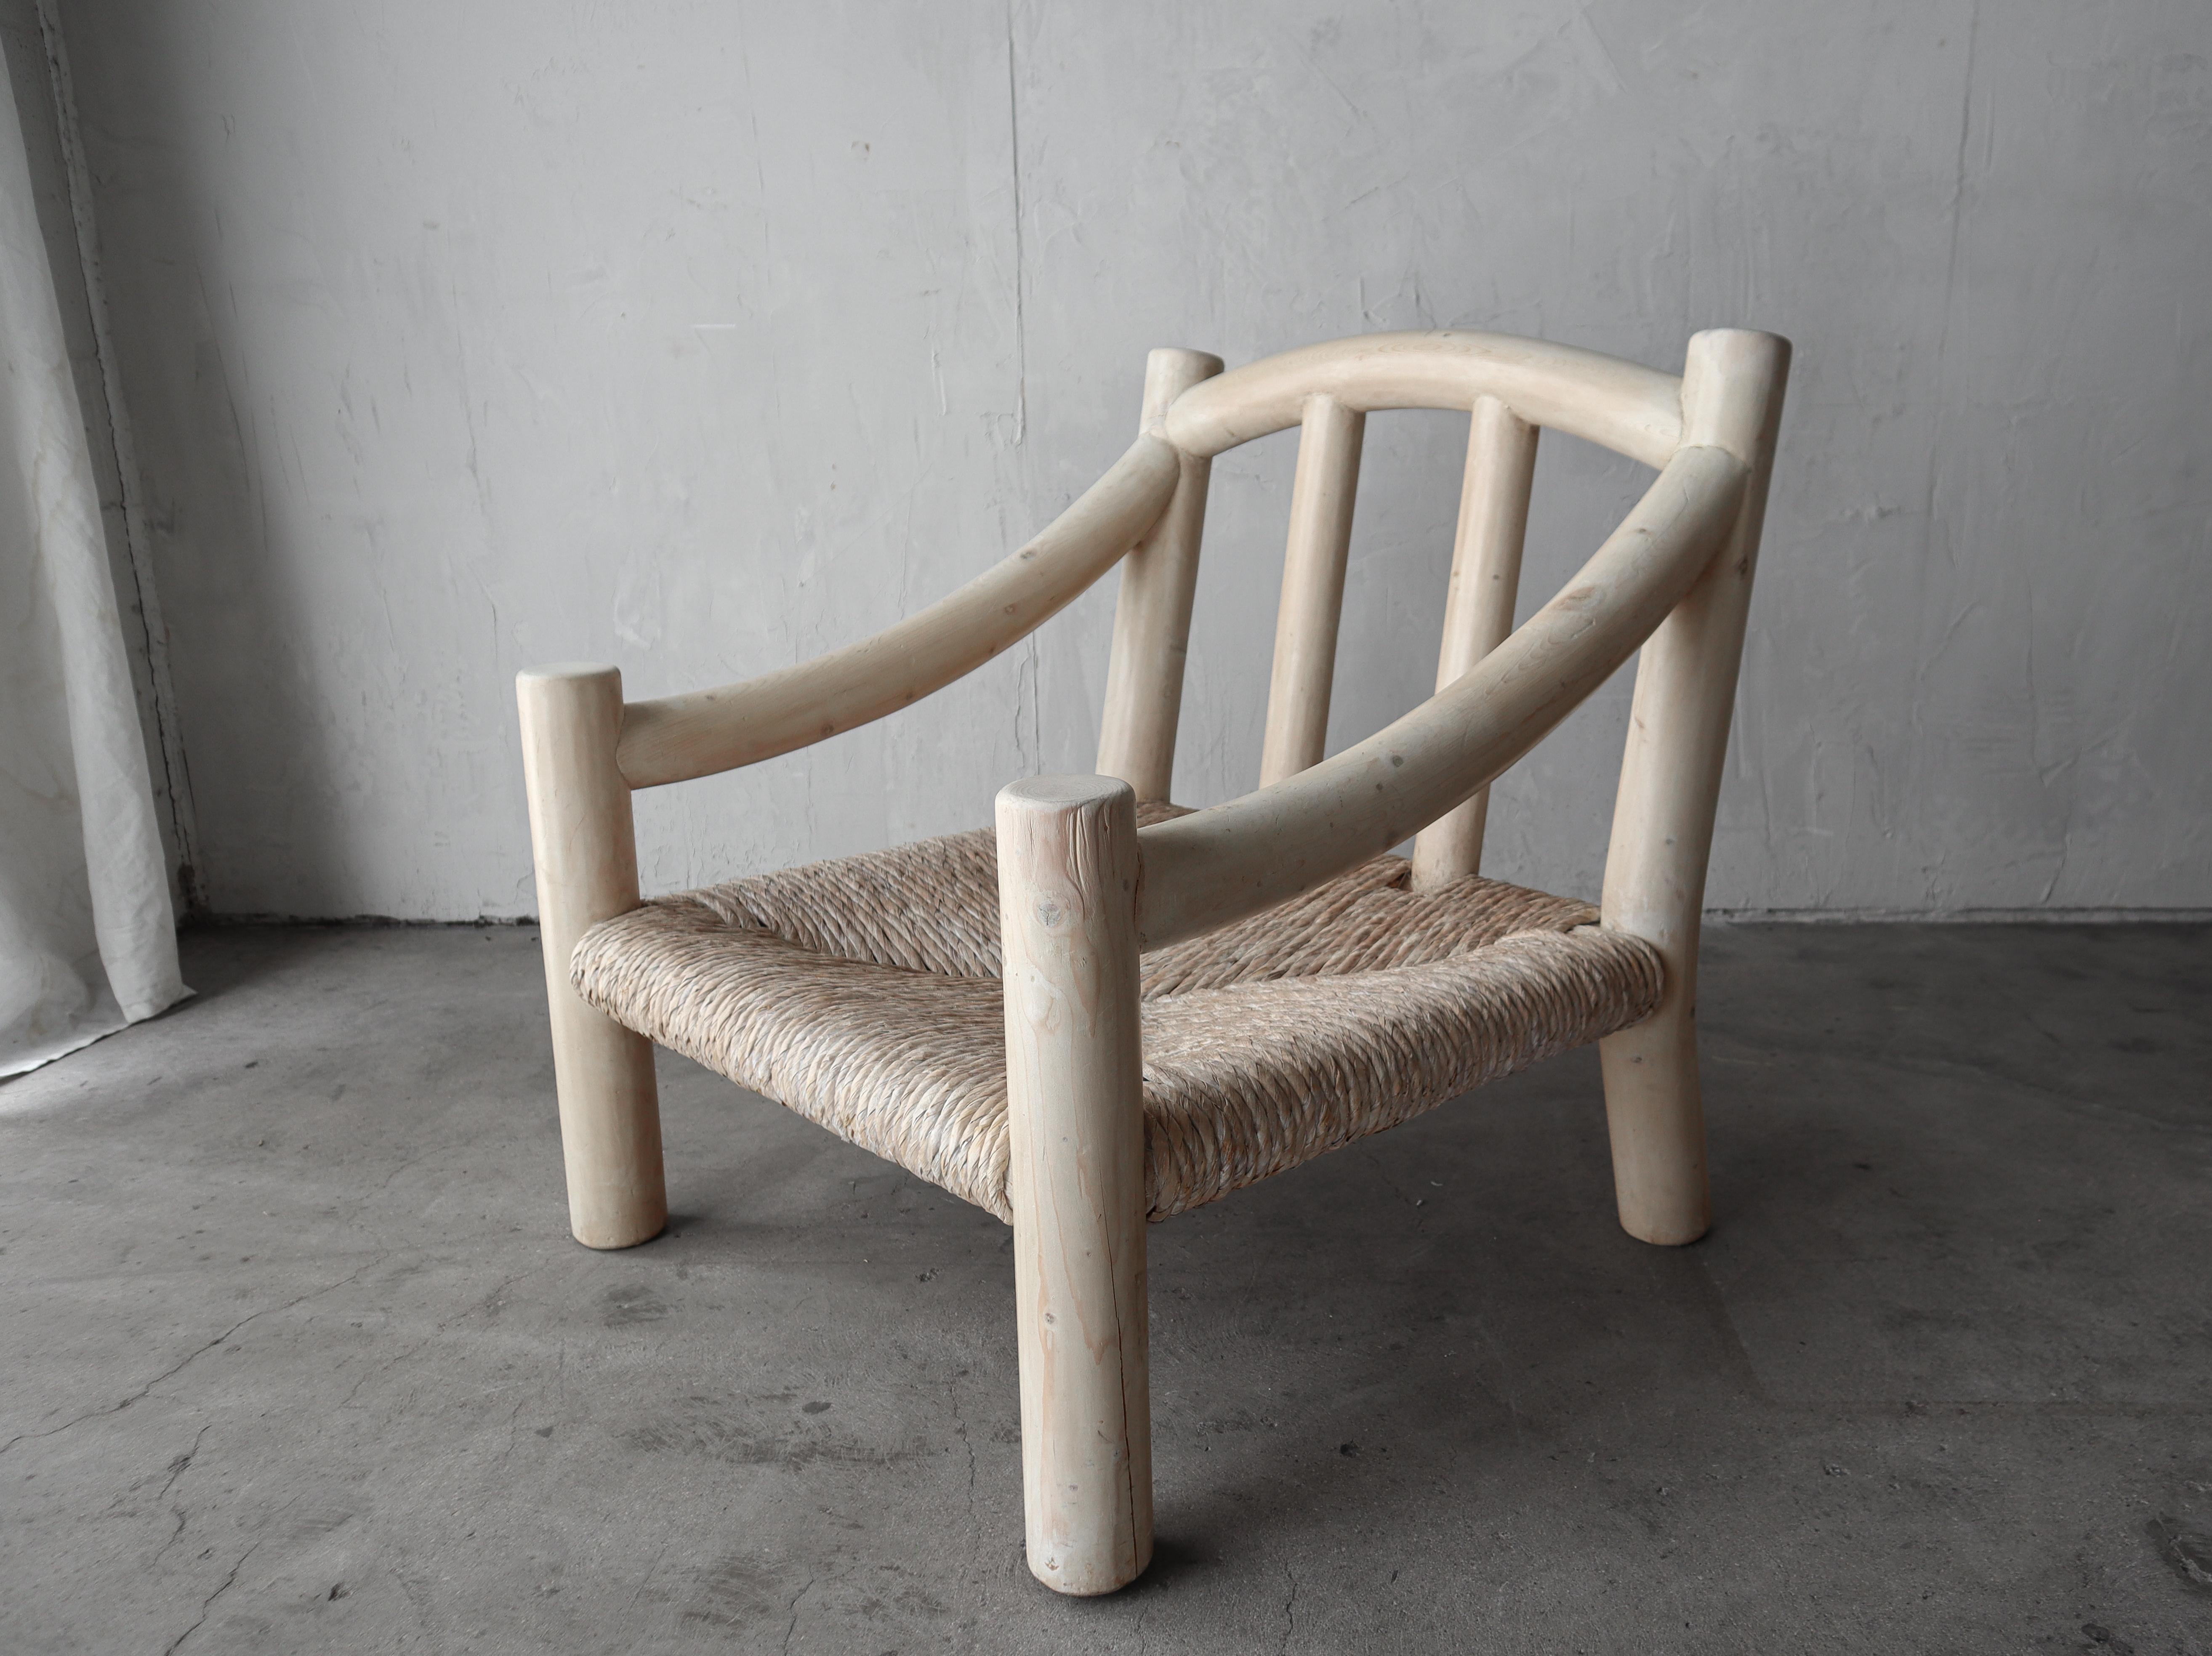 Post-Modern Pair of White Washed Pine Lounge Chairs by Michael Taylor